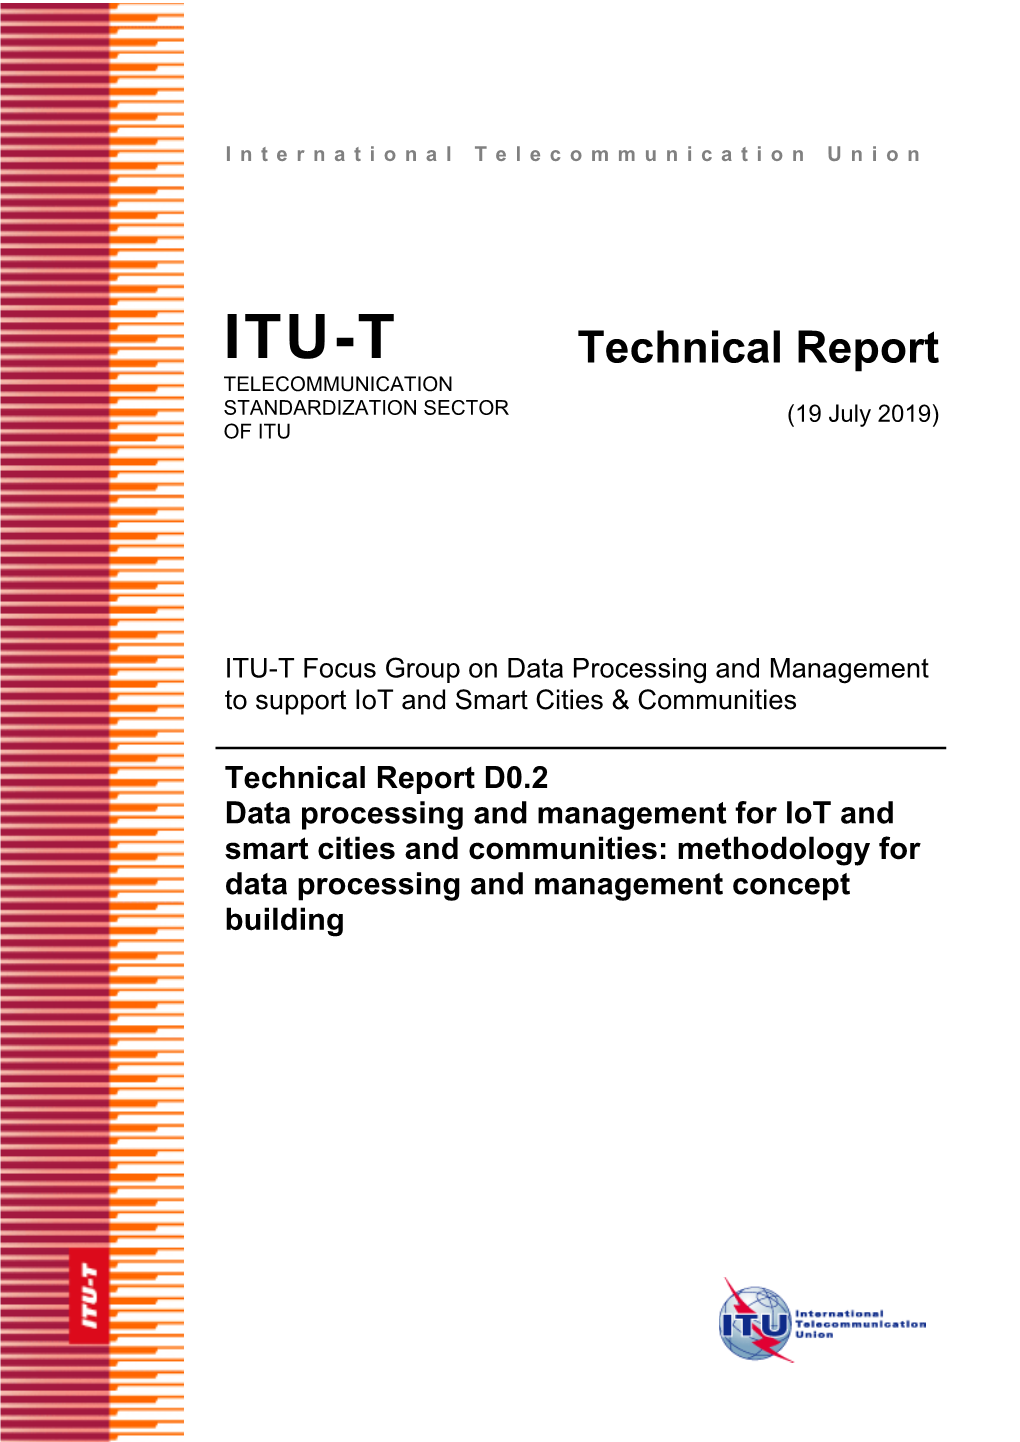 Data Processing and Management for Iot and Smart Cities and Communities: Methodology for Data Processing and Management Concept Building